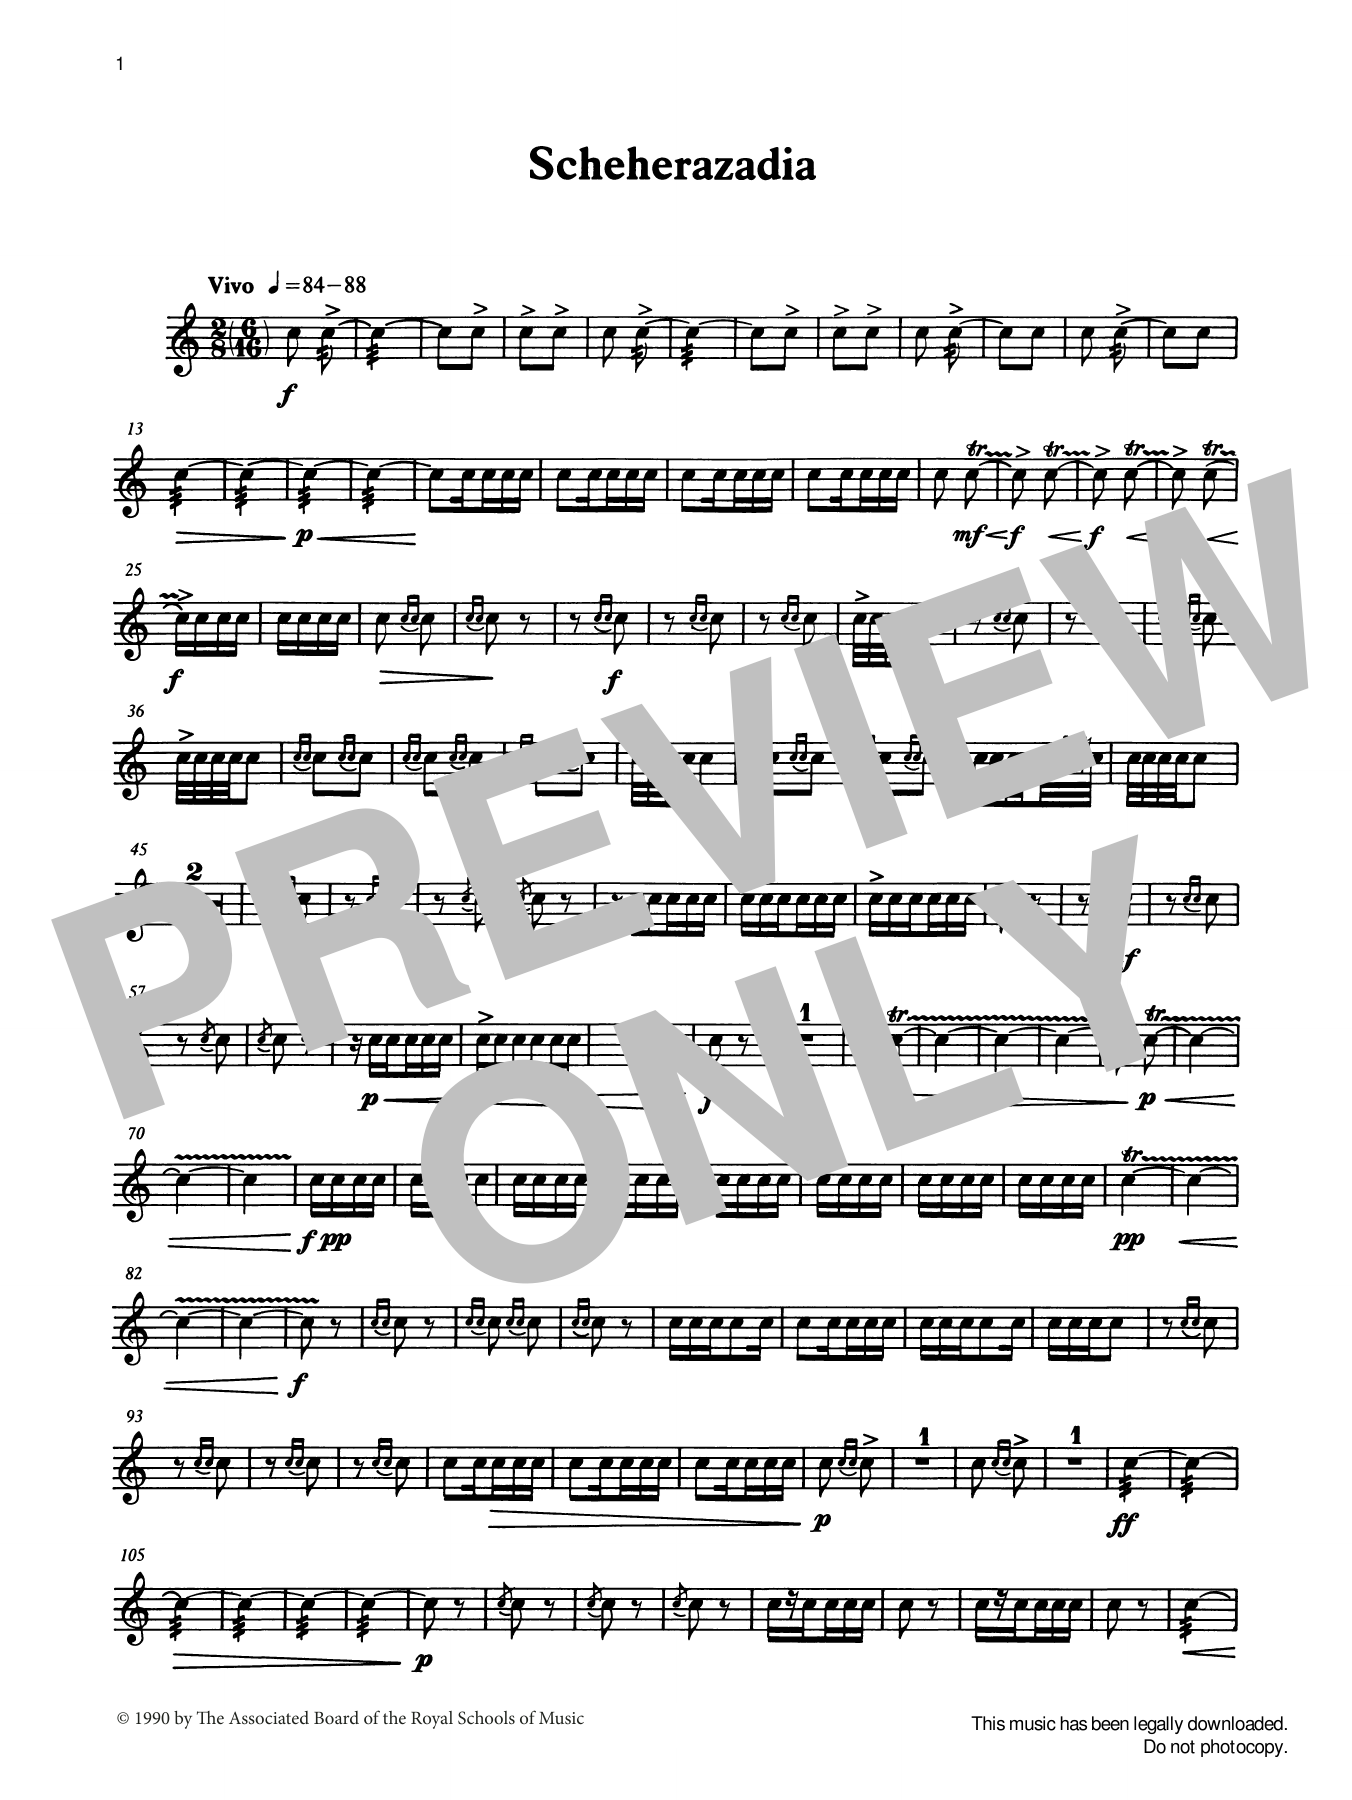 Download Ian Wright and Kevin Hathaway Scheherazadia from Graded Music for Sna Sheet Music